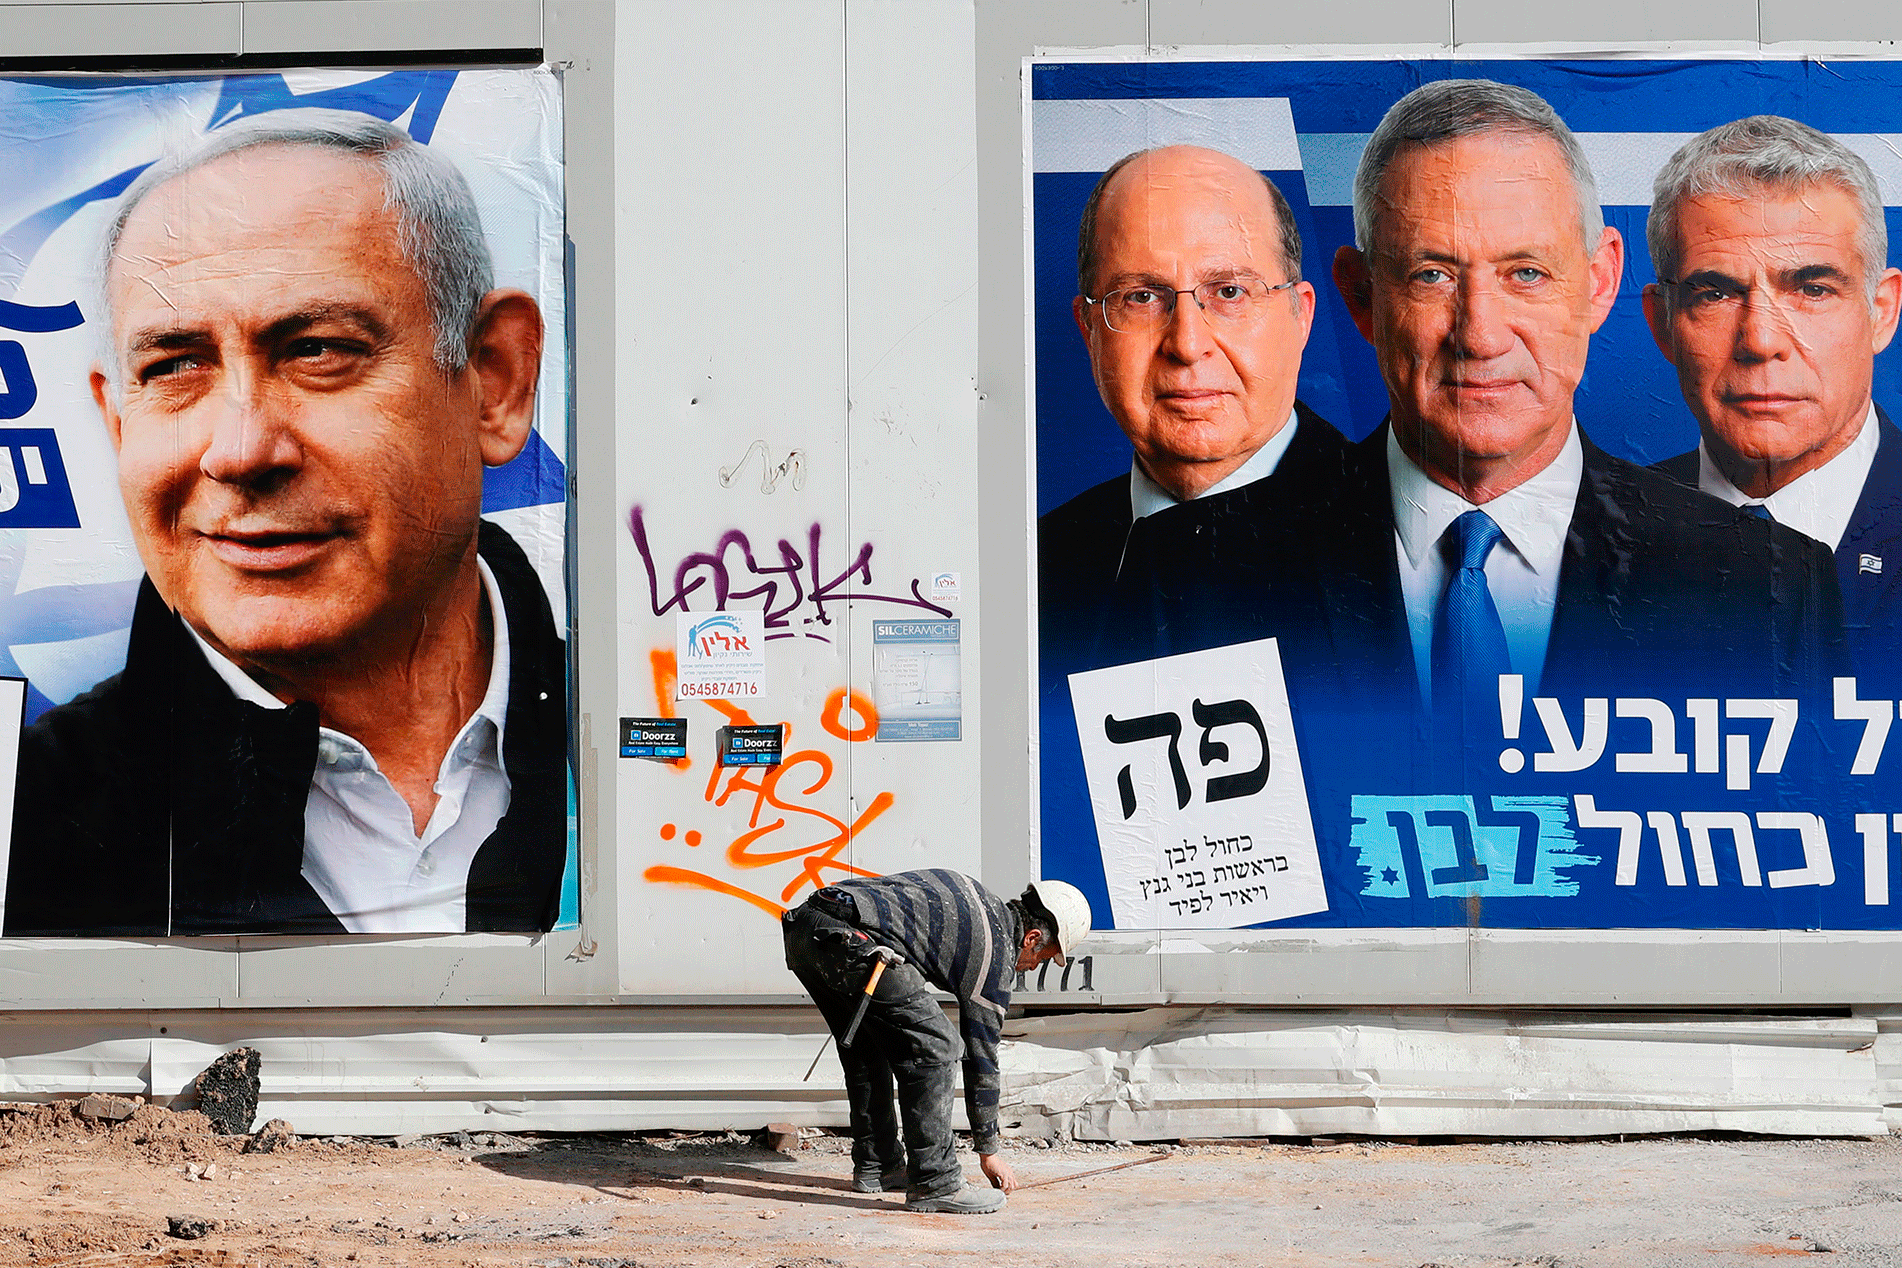 Israel Decides: Post-election Analysis (VIDEO)